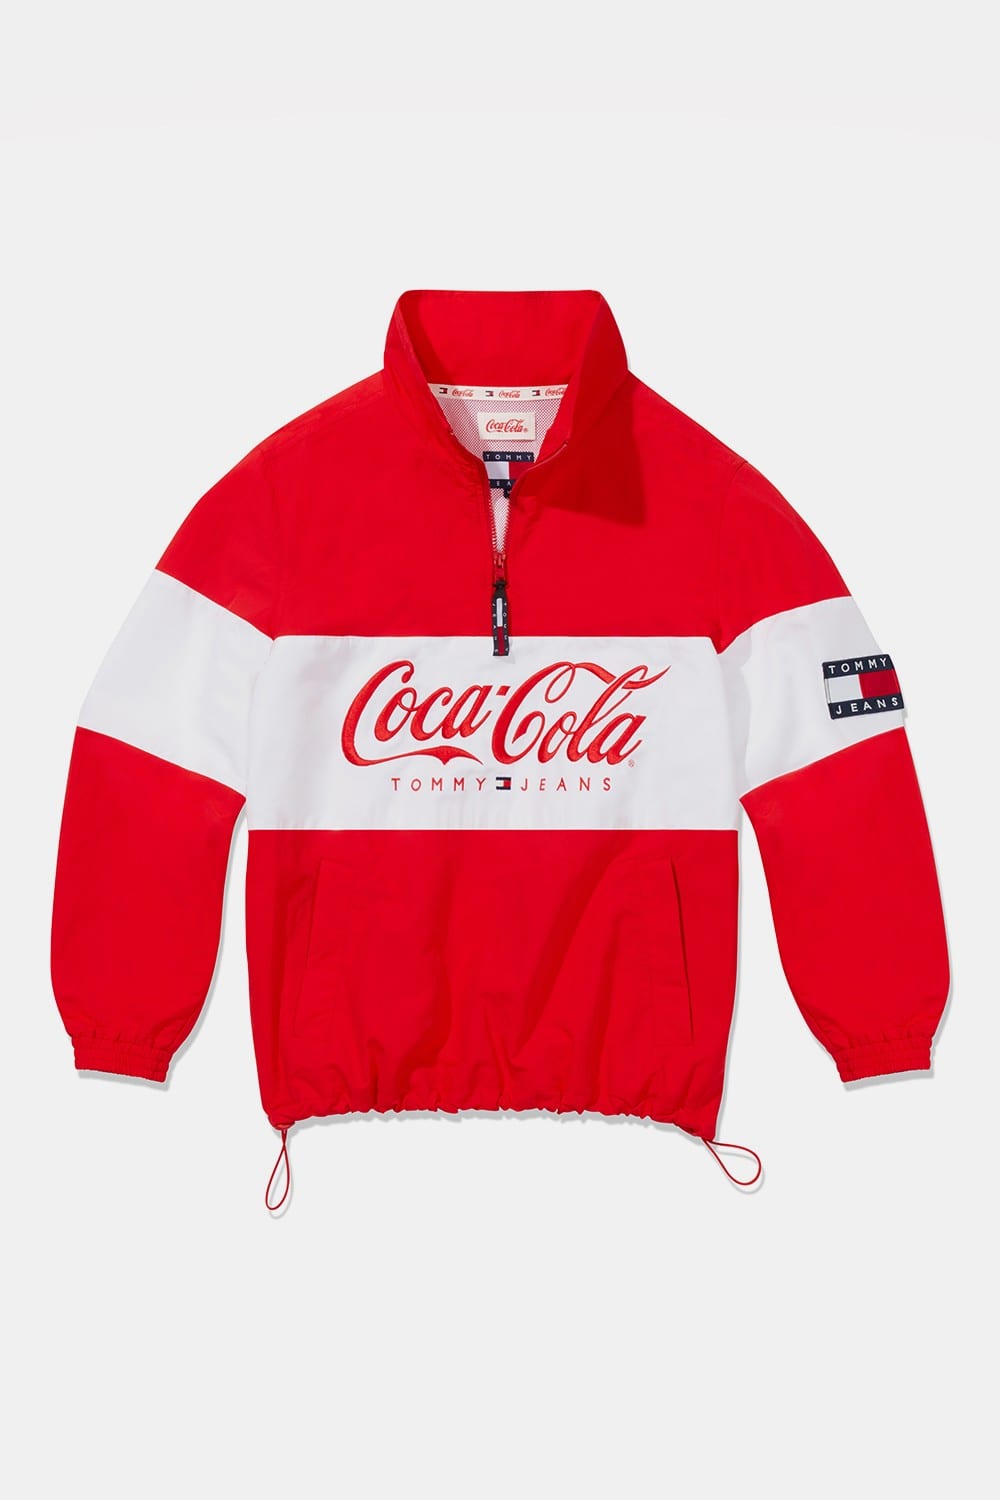 Tommy Jeans x Coca-Cola SS19 Capsule 